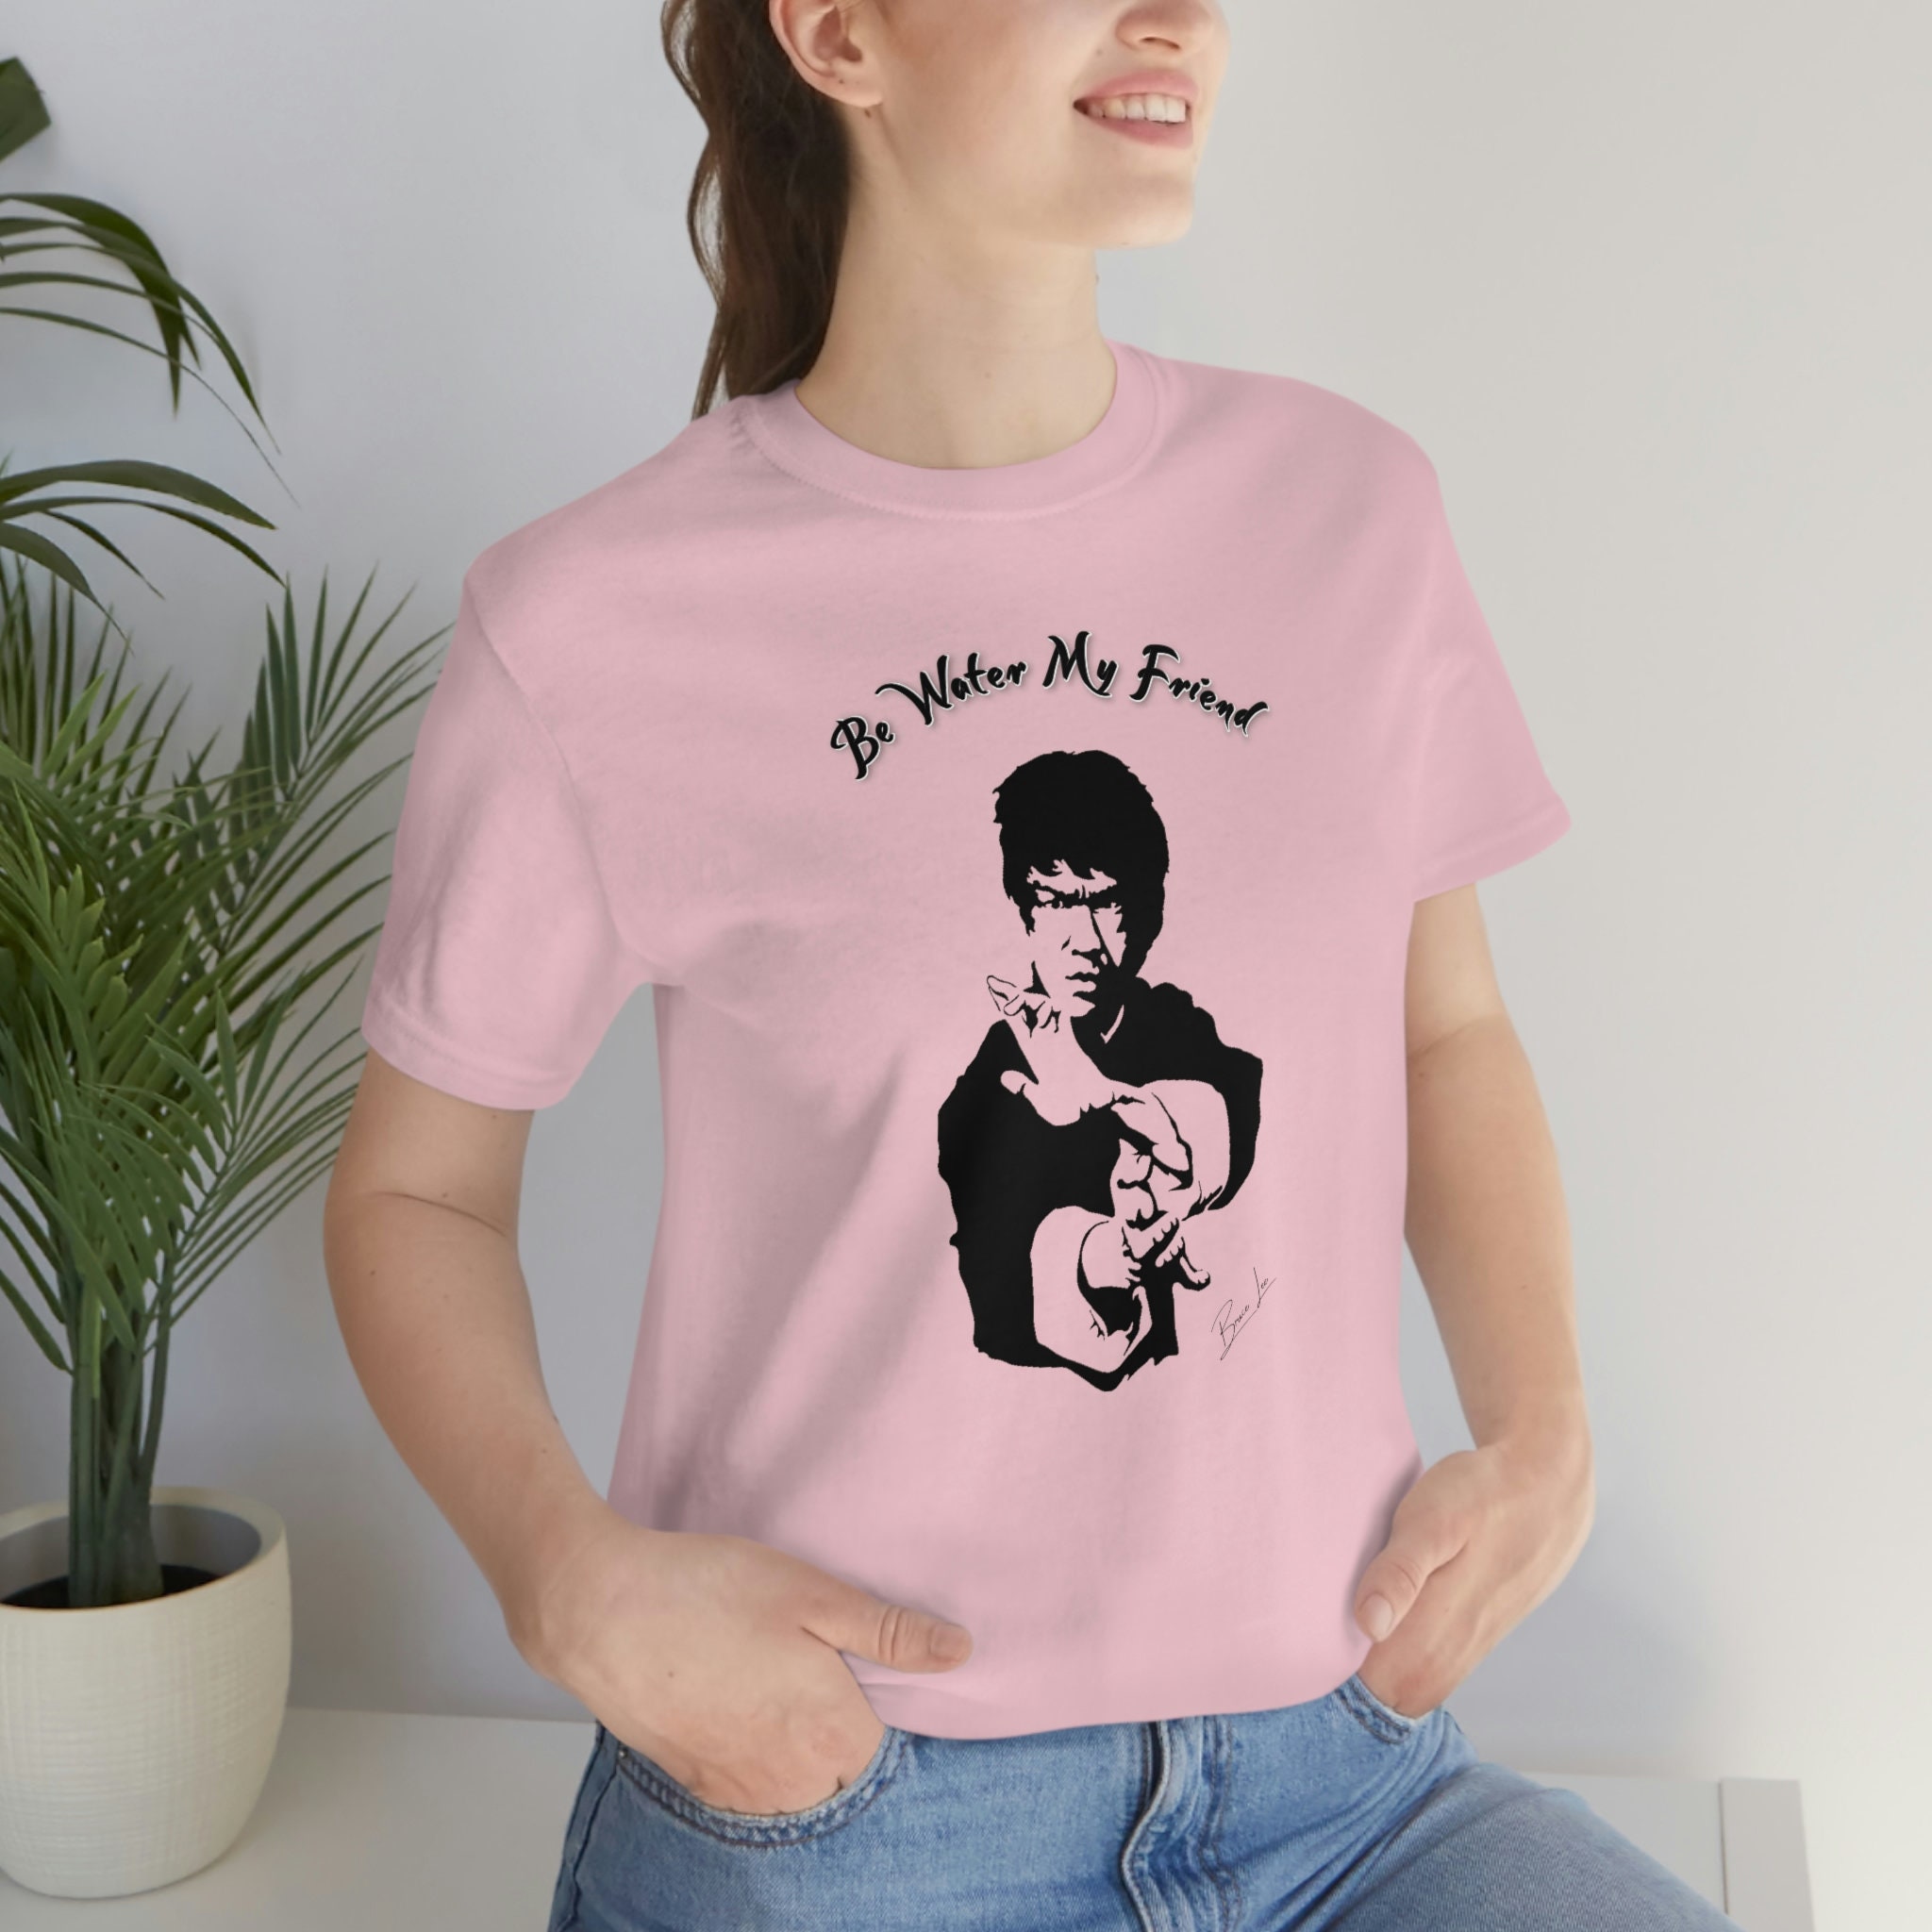 Discover Bruce Lee Tee Shirt | Bruce Lee Gift | Martial Arts Gifts